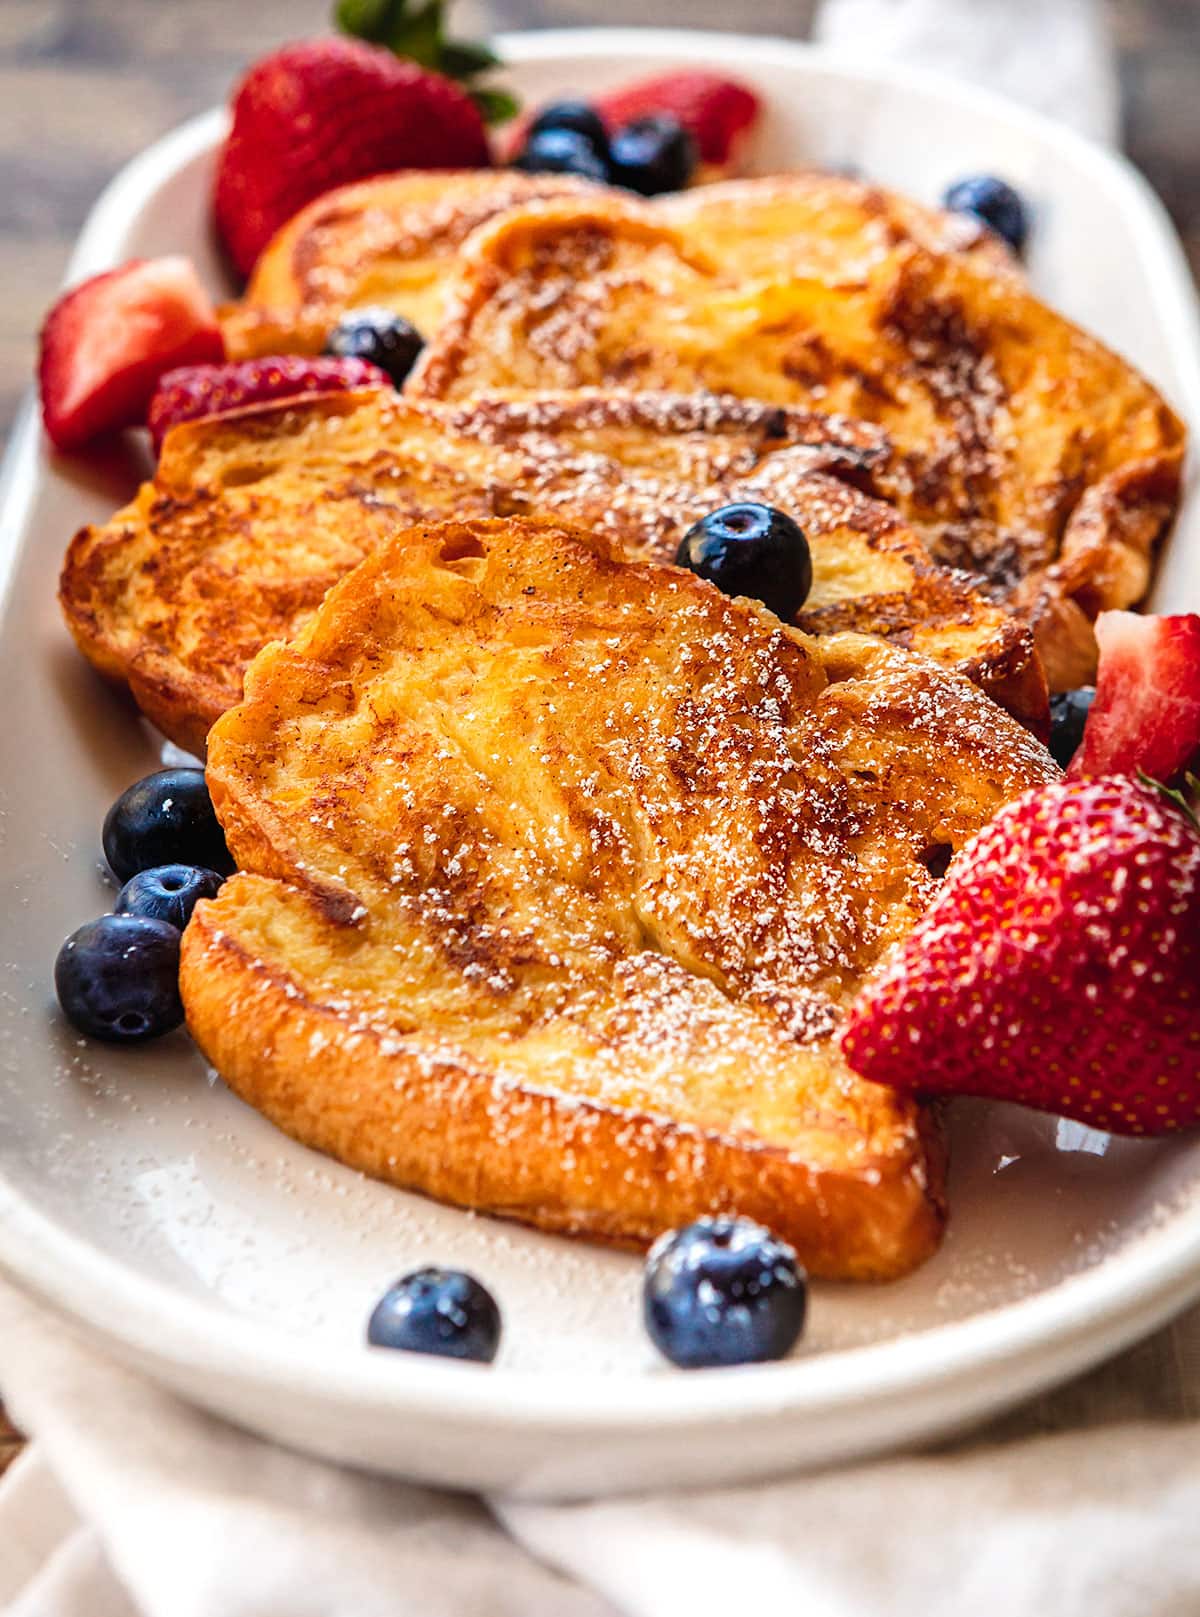 French Toast on plate with strawberries and blueberries